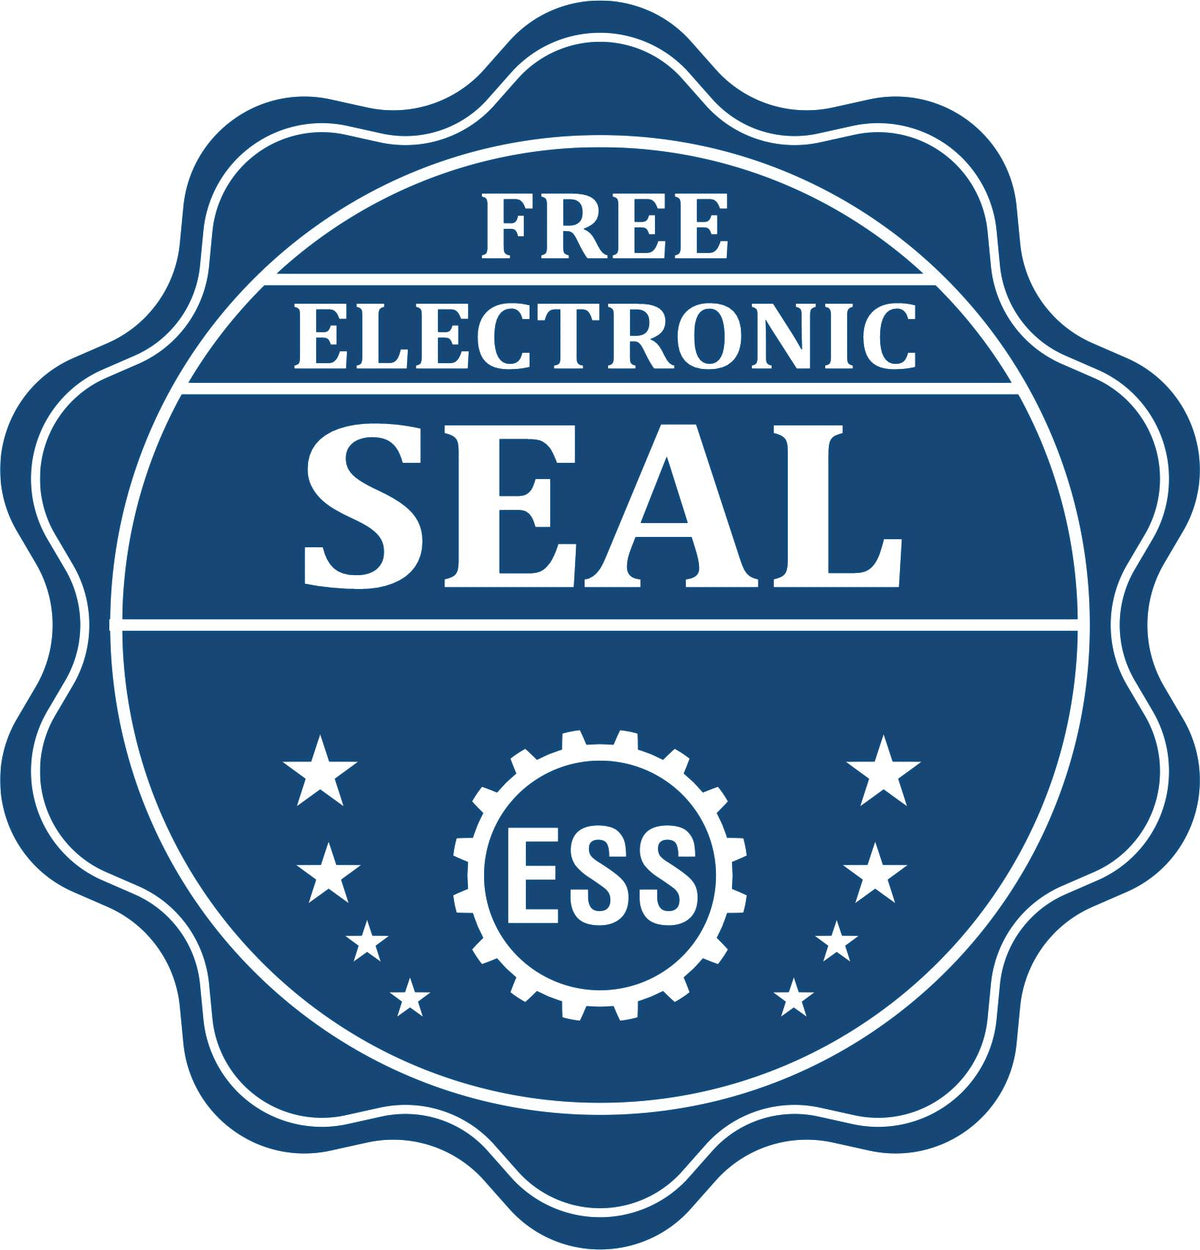 A badge showing a free electronic seal for the Handheld Oklahoma Professional Geologist Embosser with stars and the ESS gear on the emblem.